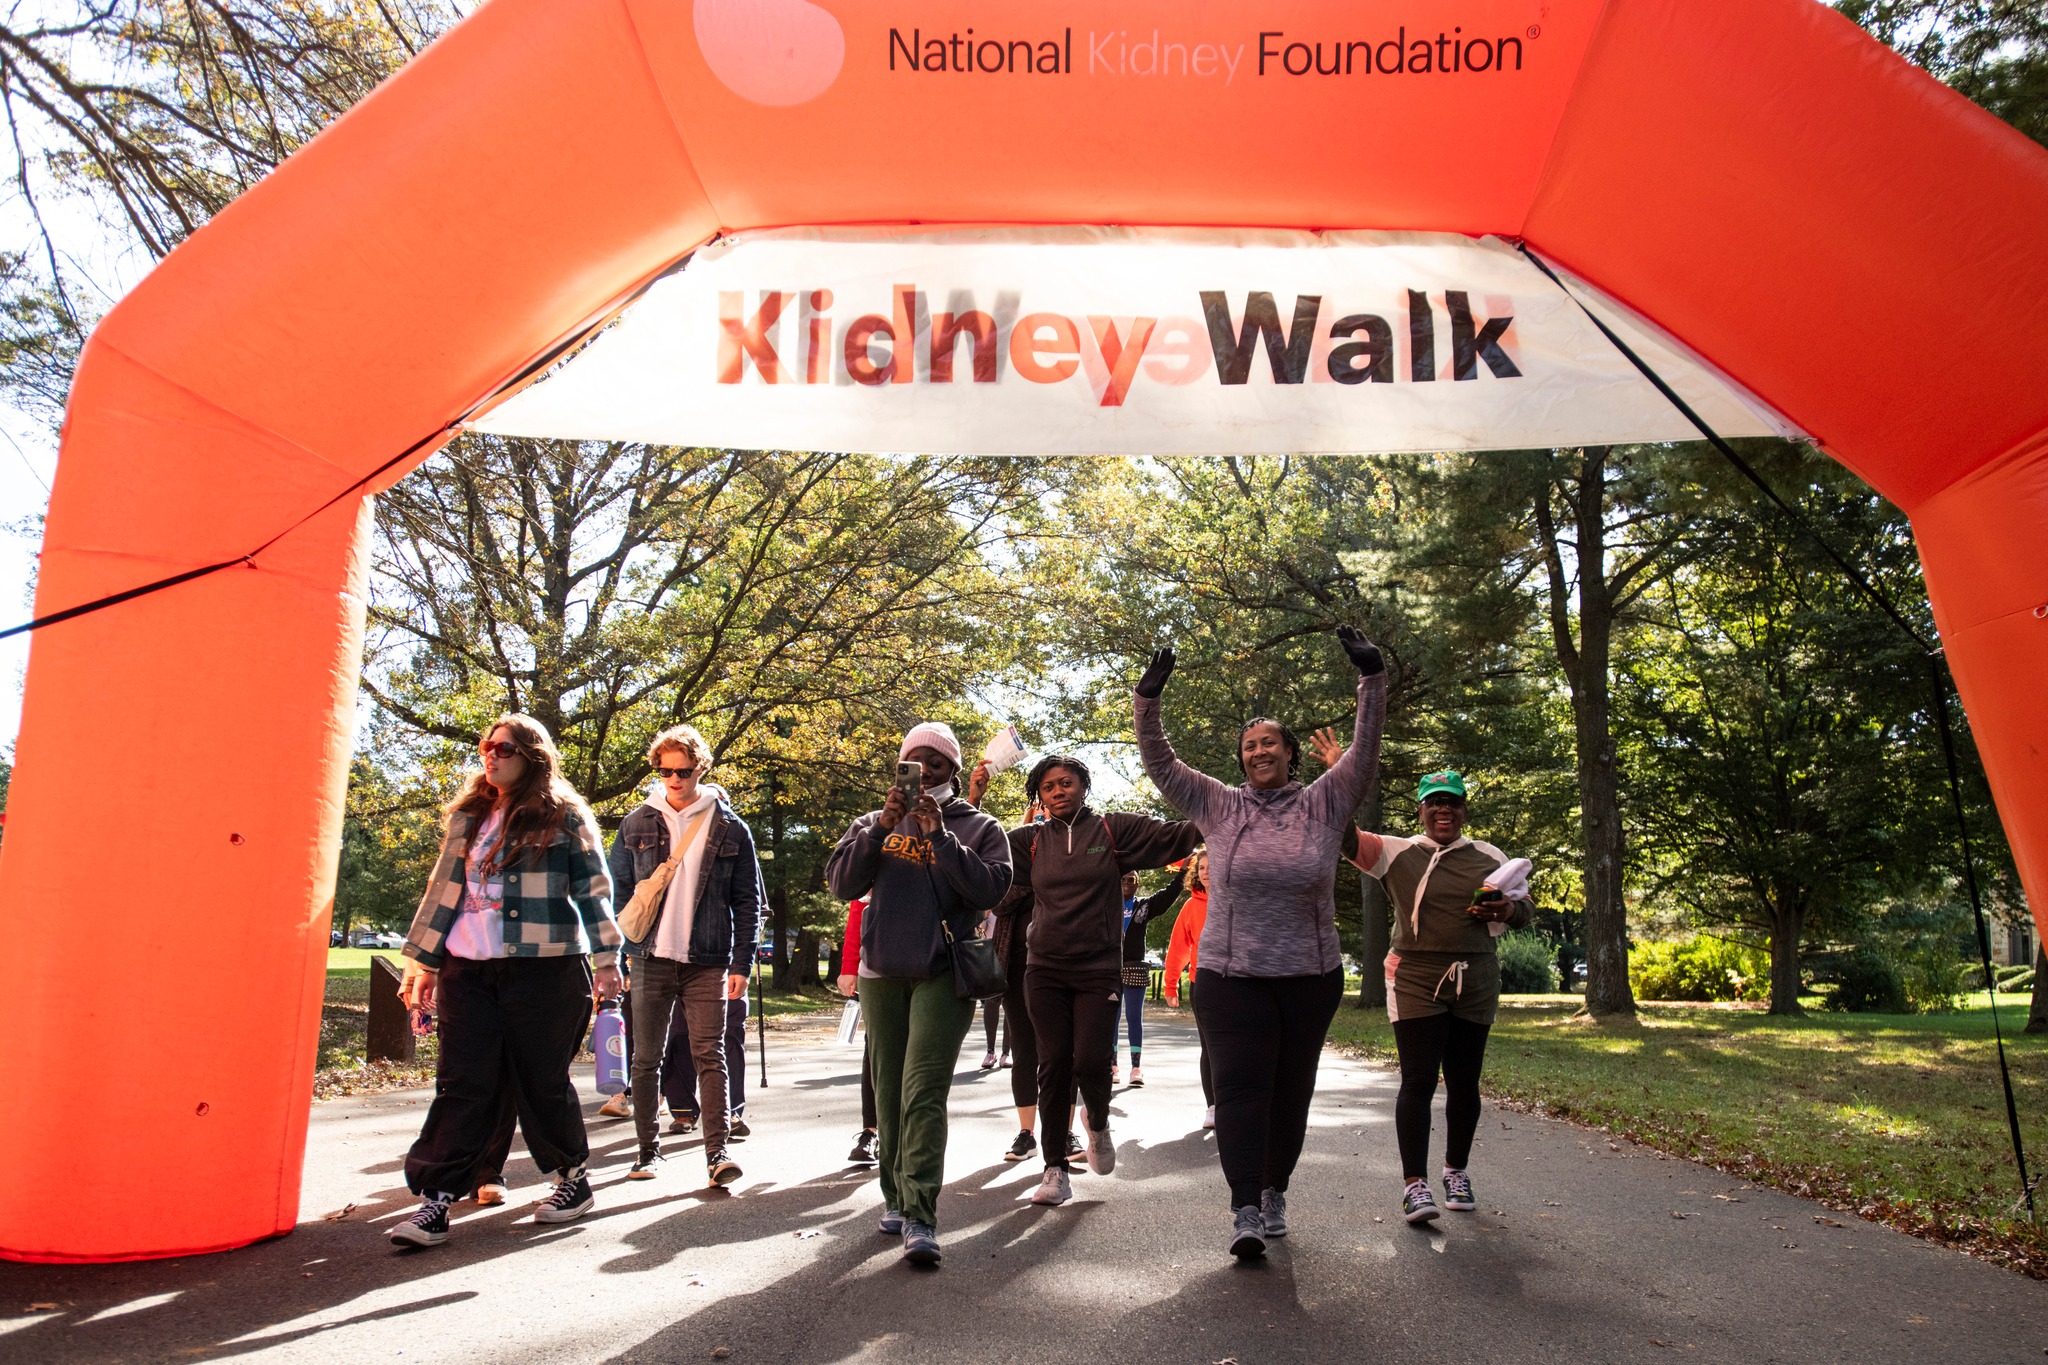 Kidney Walkers passing through an arch and cheering